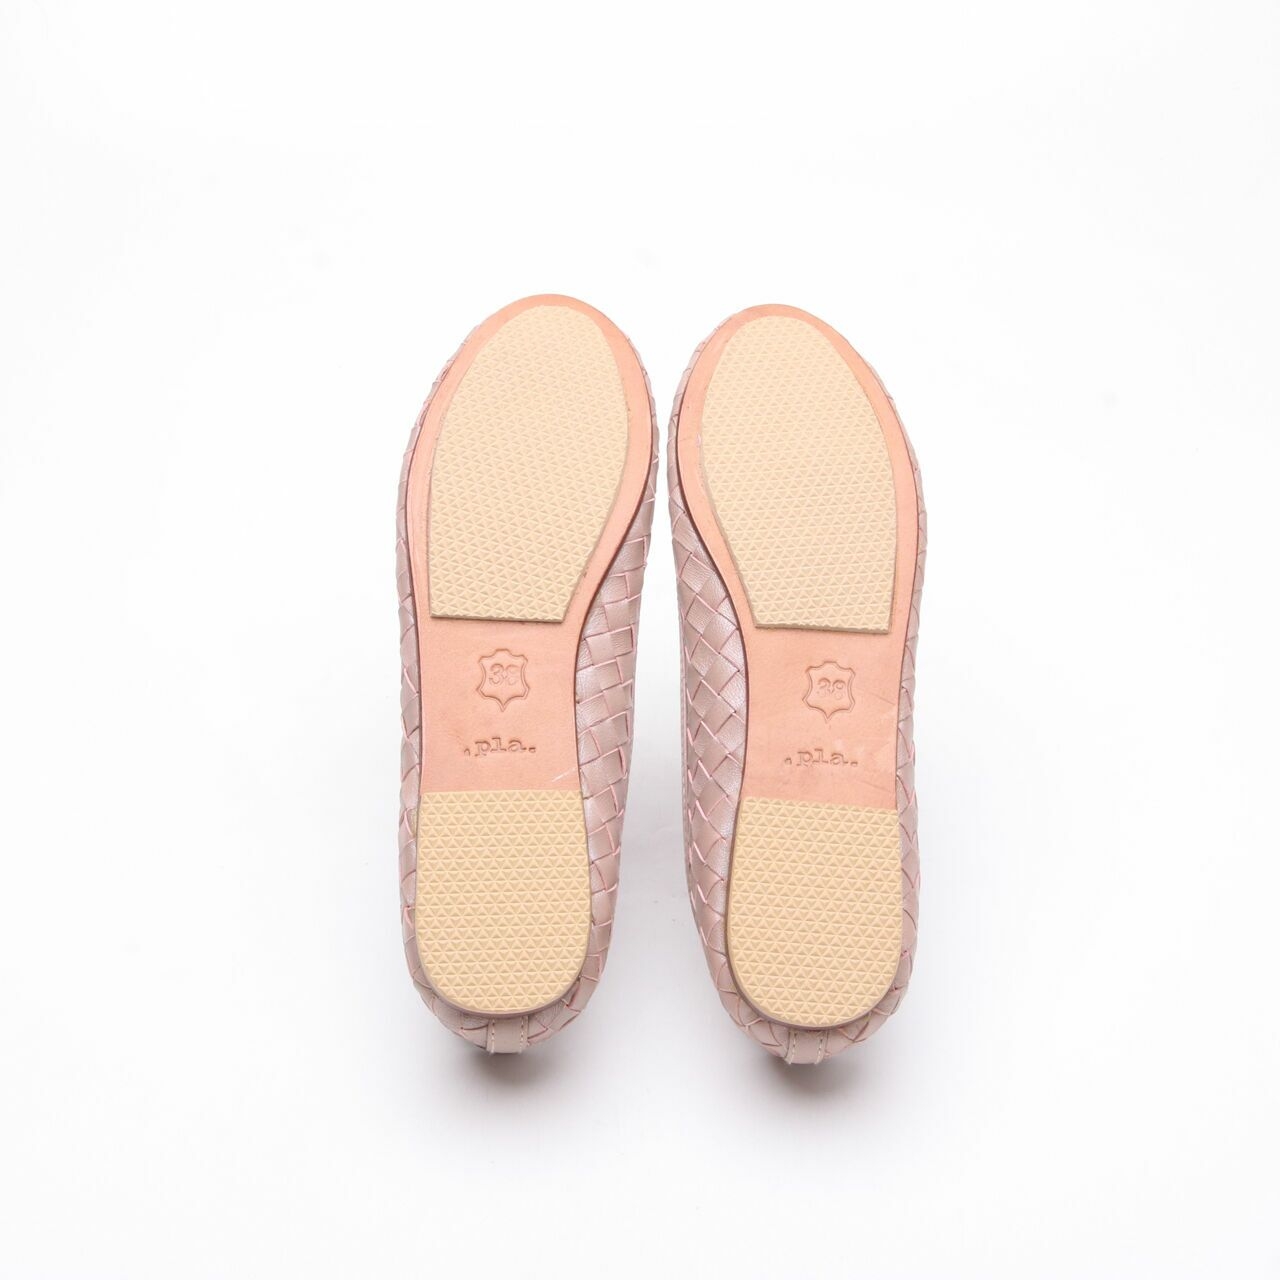 Pla Silver & Rose Gold Flats